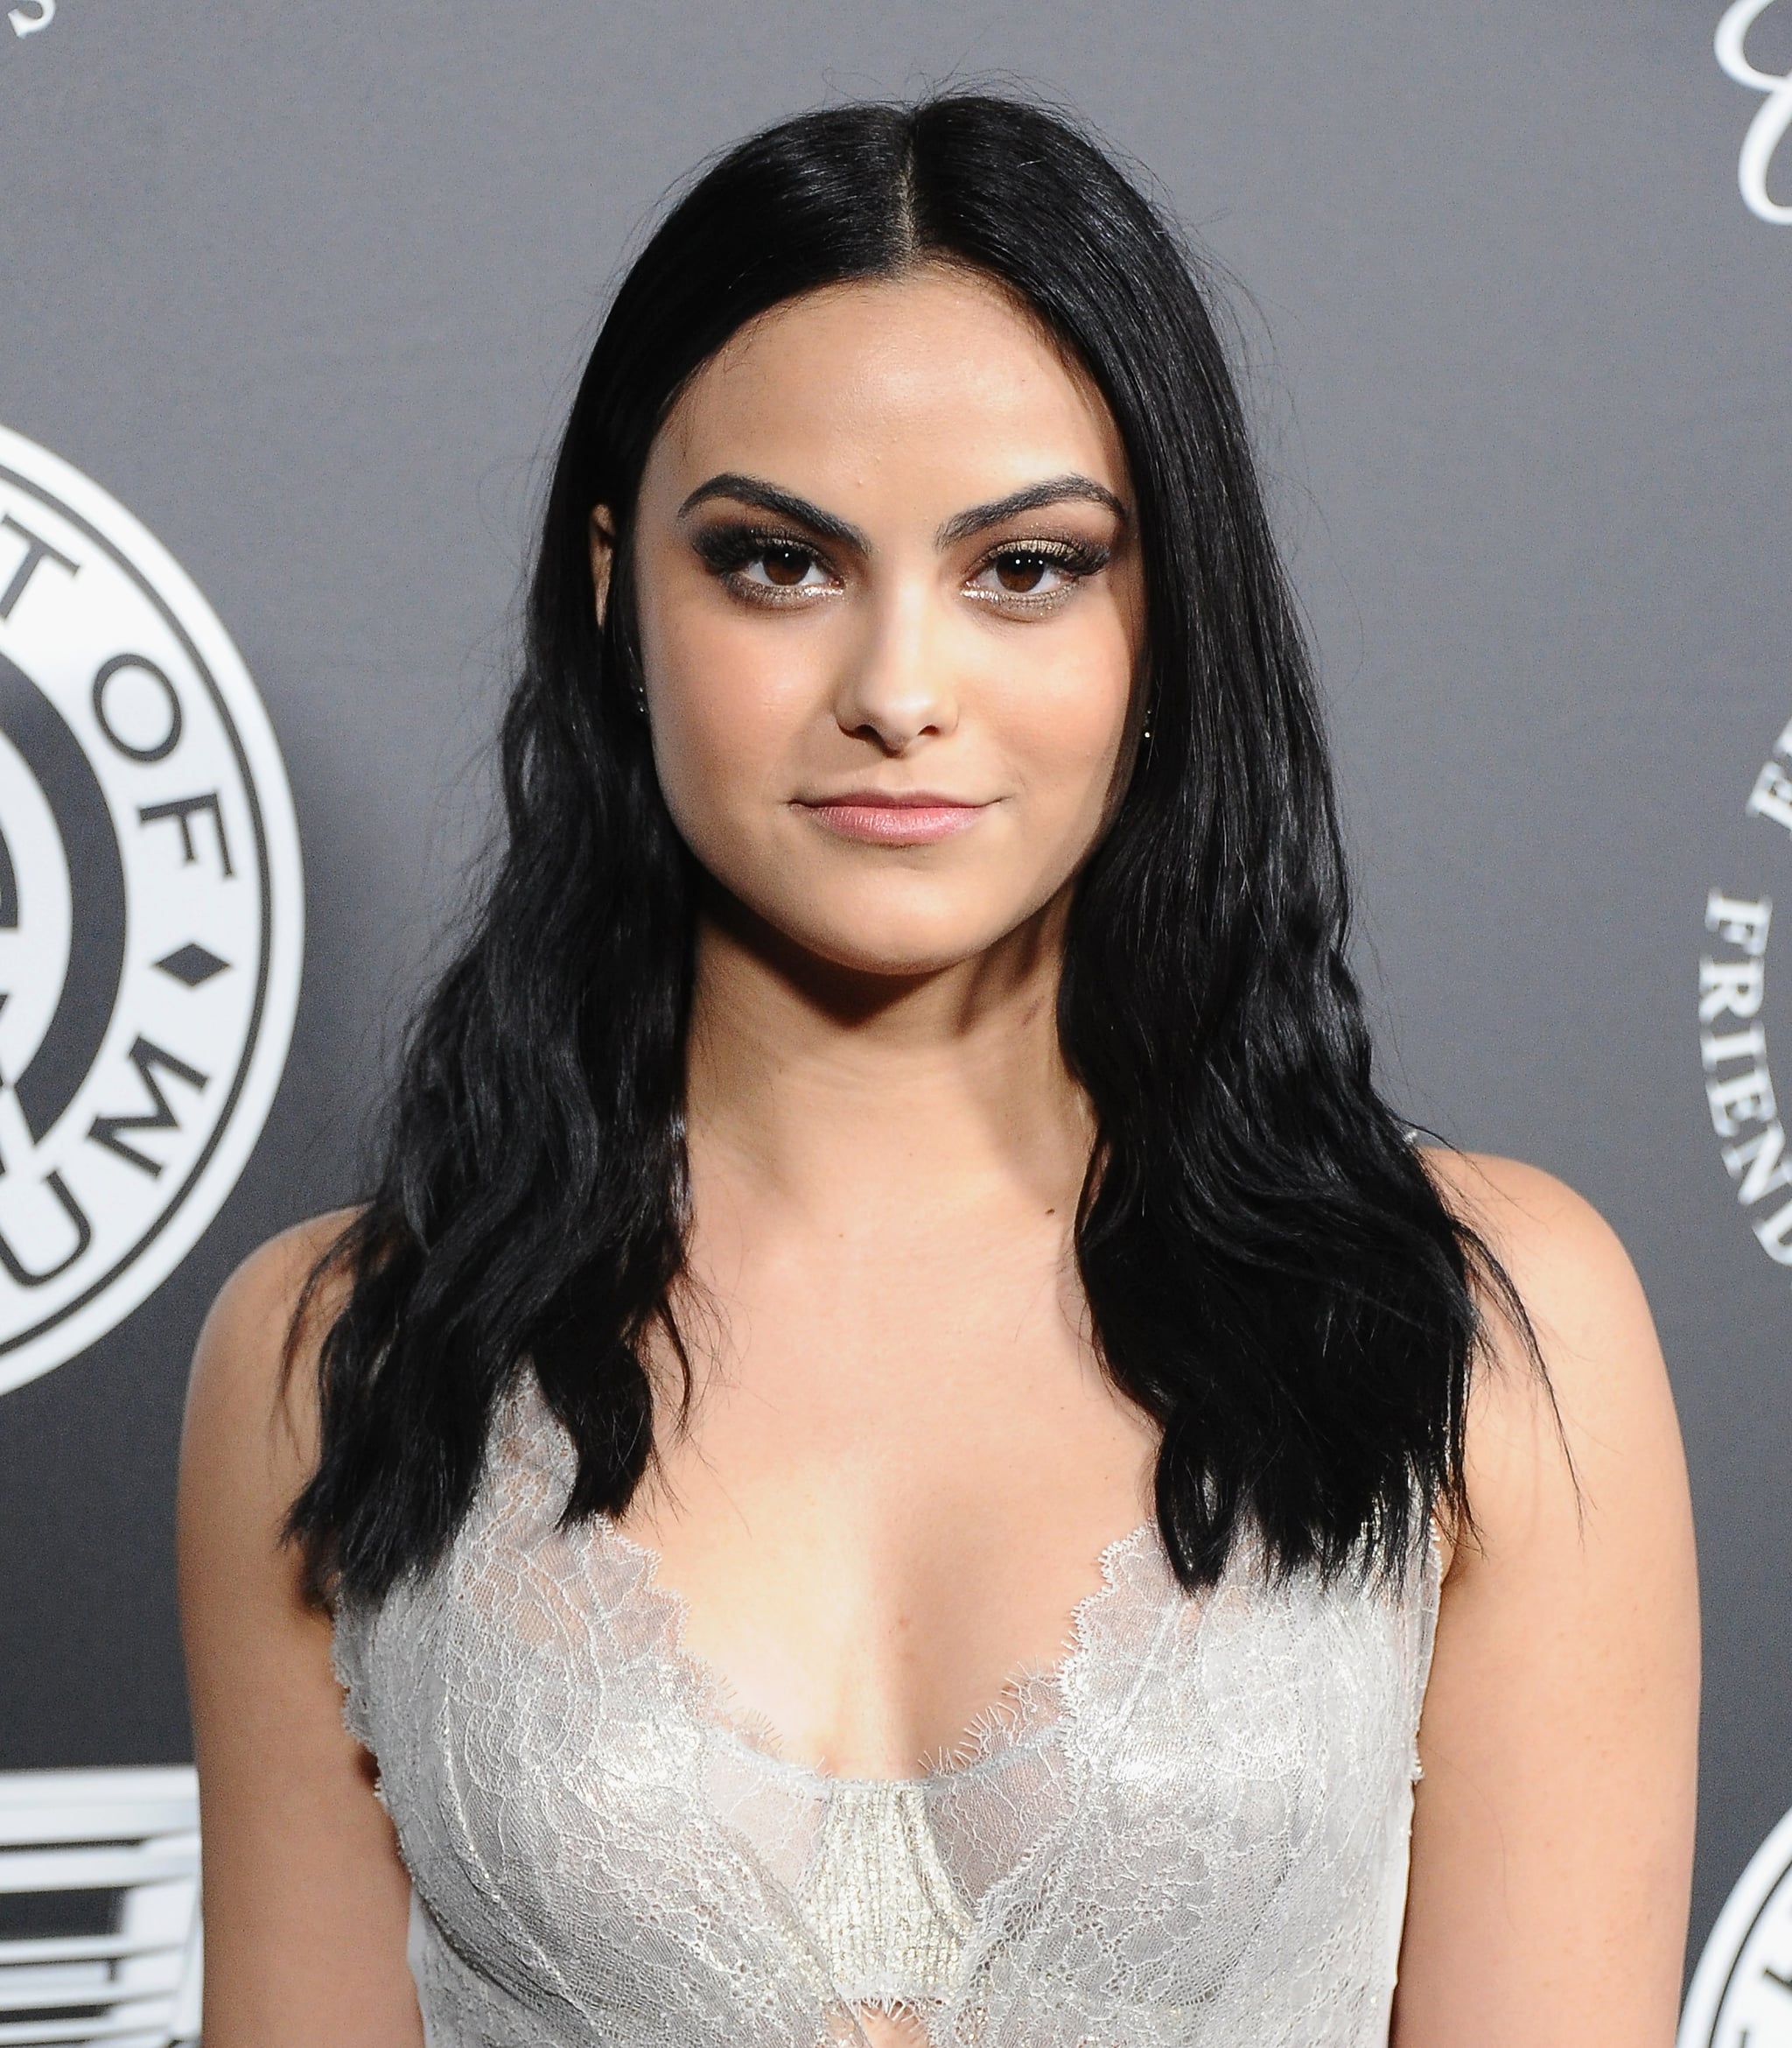 camila mendes topless